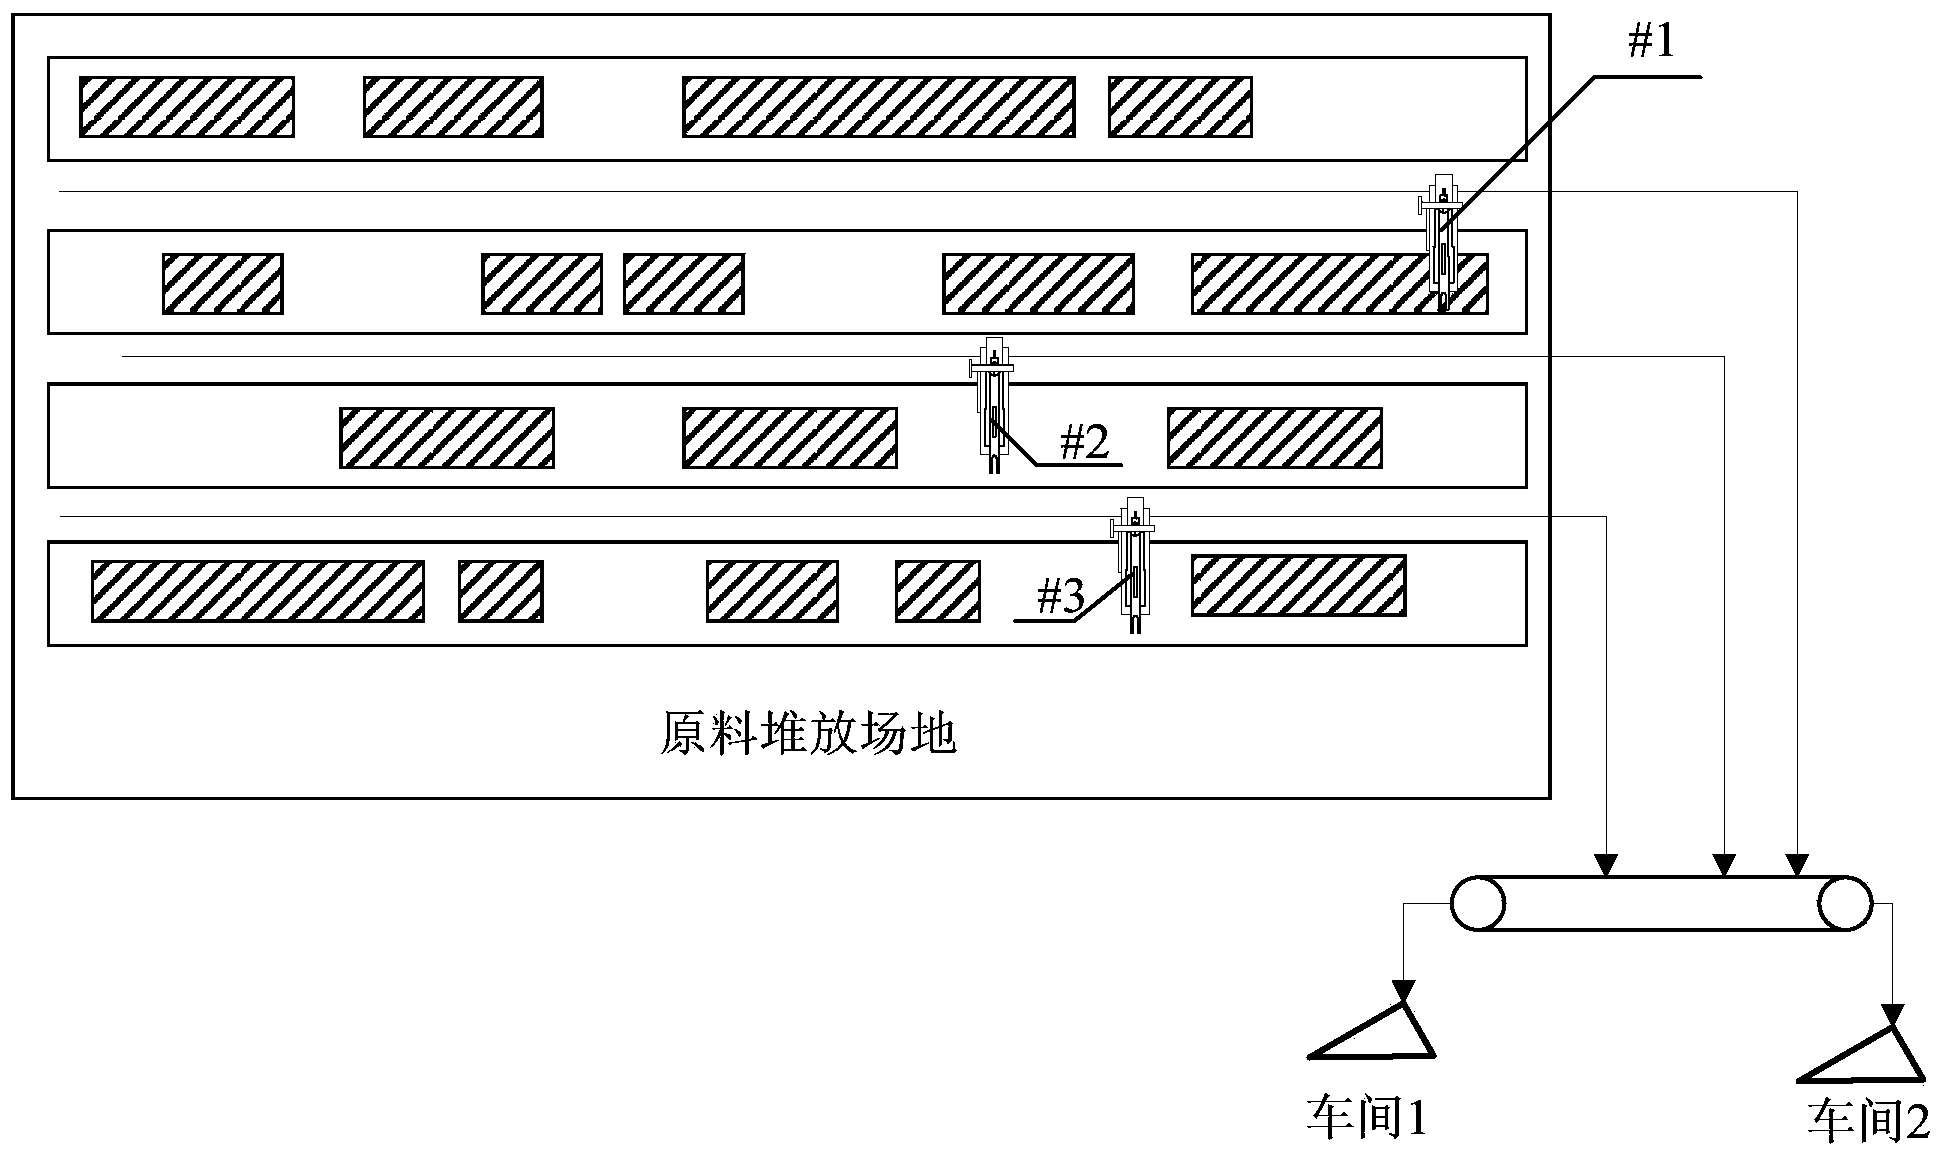 Optimized operation control method for raw material taking equipment in iron and steel enterprise